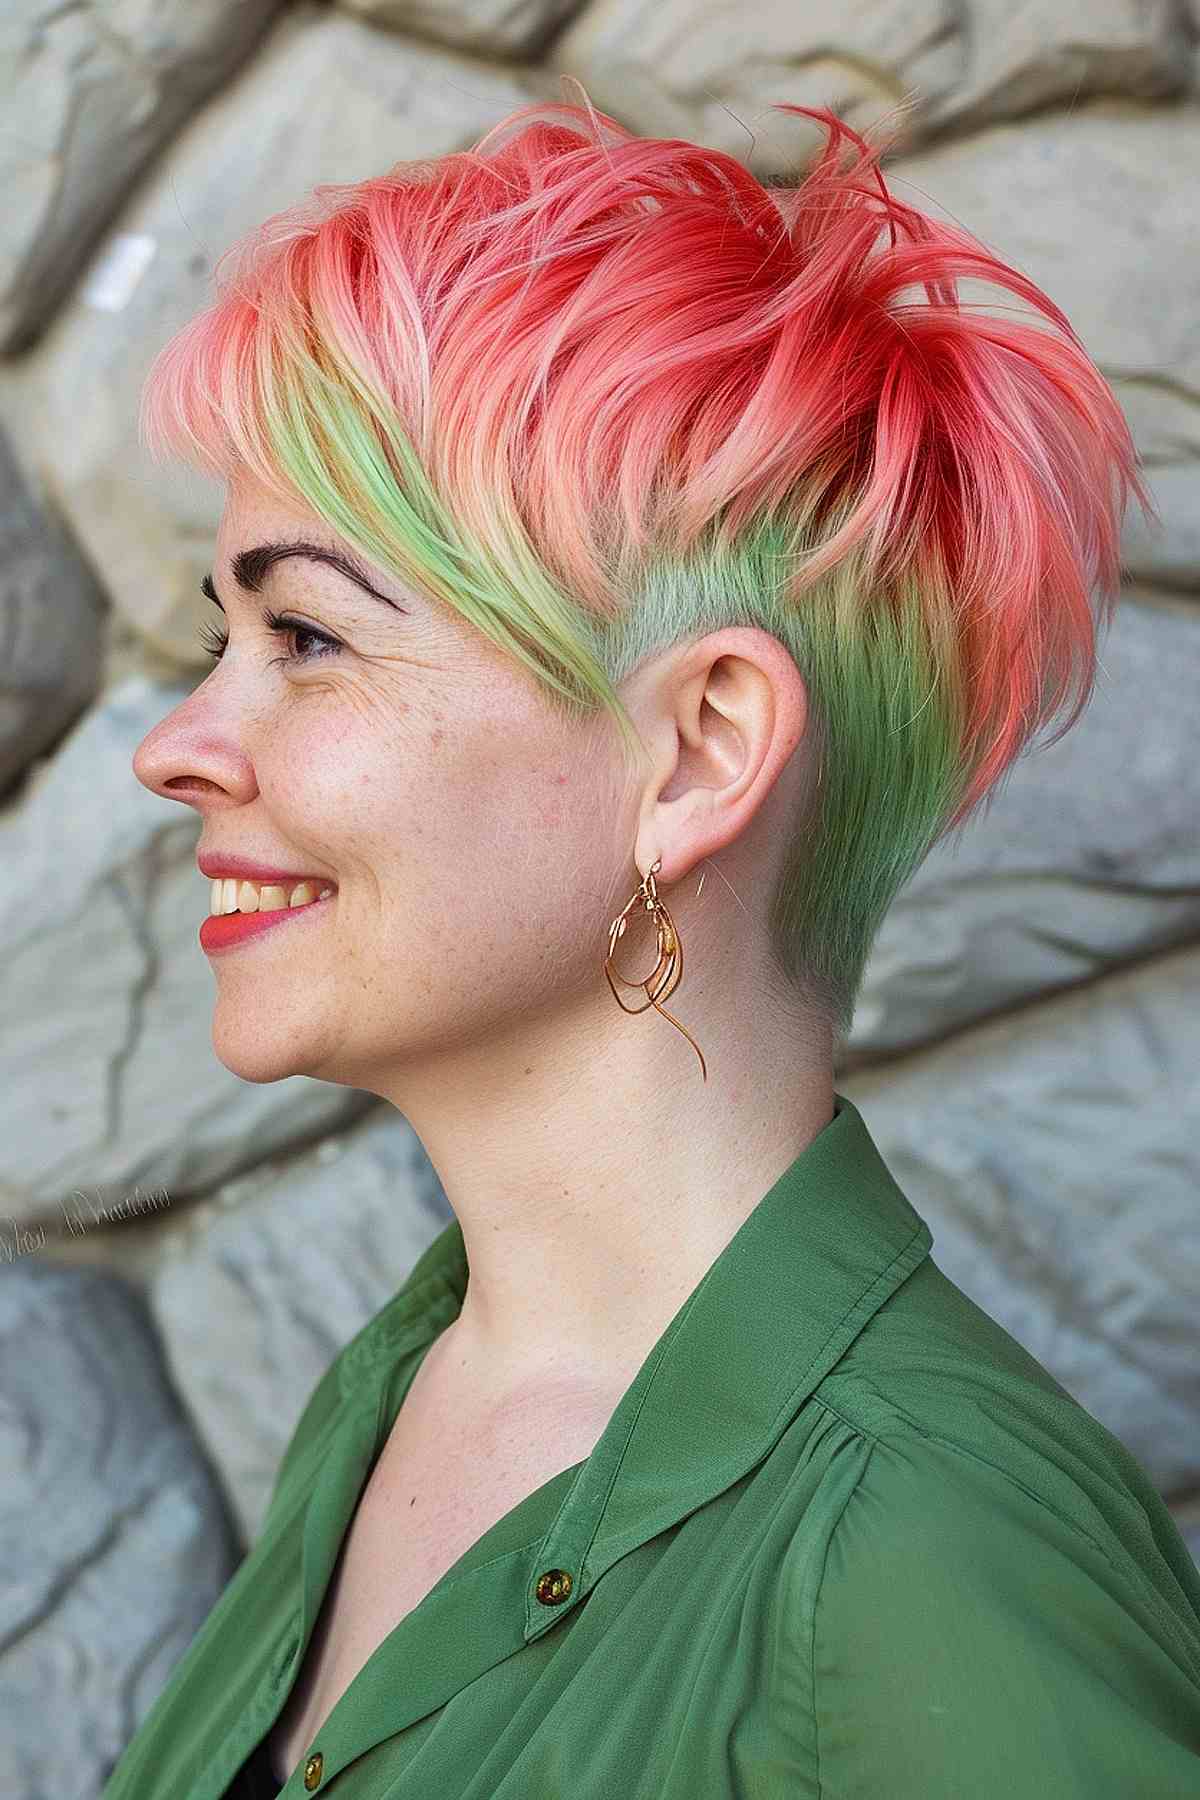 A stylish pixie cut colored in a watermelon theme with pastel green roots and vibrant pink to coral tones over the crown, creating a playful and low-maintenance hairstyle.